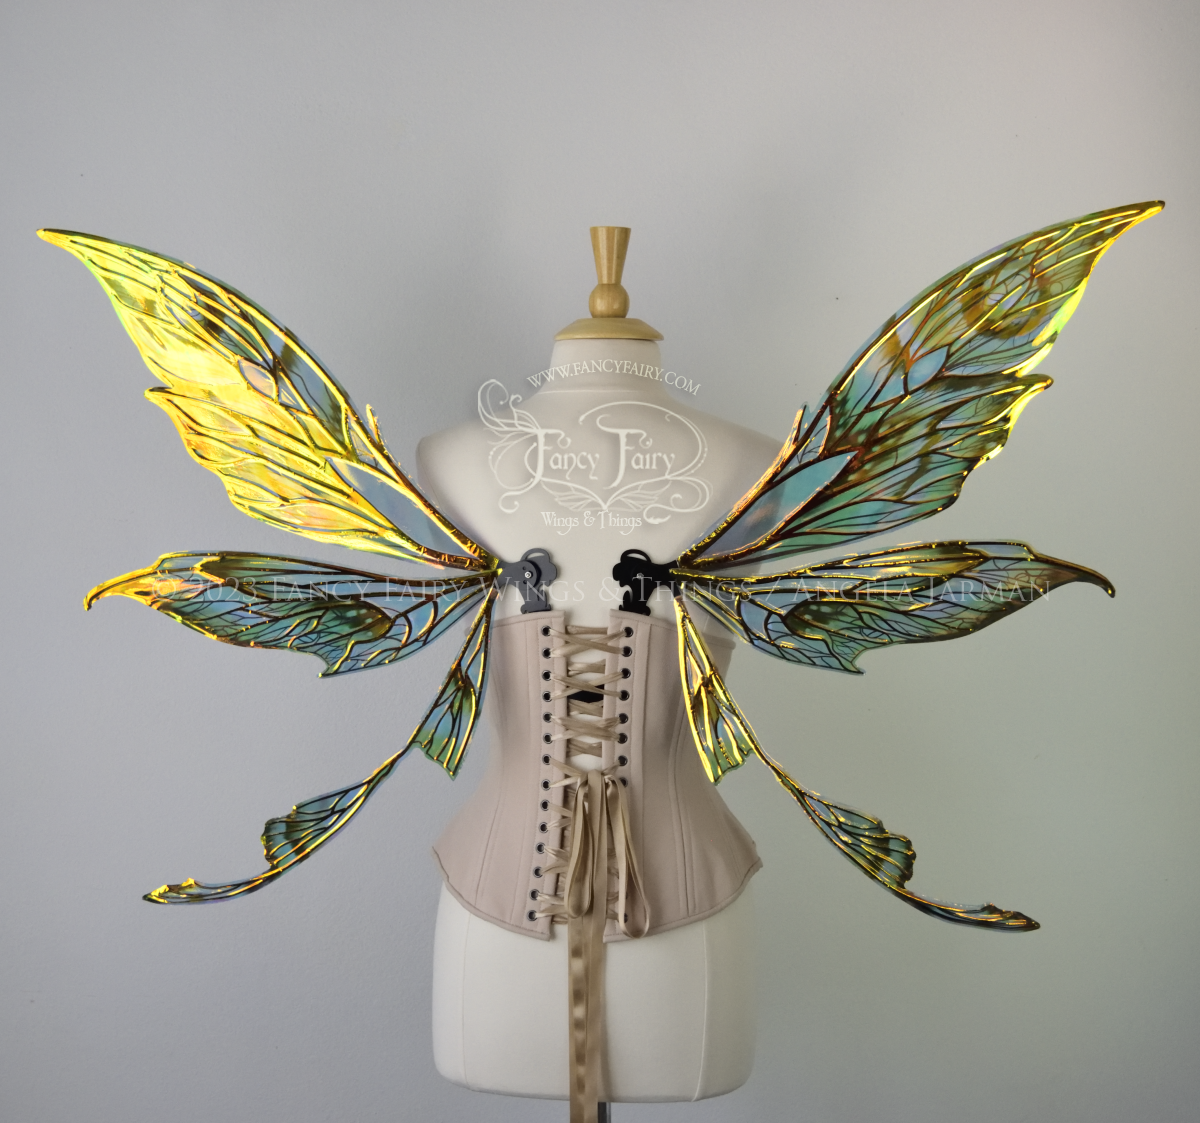 Back view of large green, gold & black painted iridescent fairy wings with black veins. Upper panels are elongated with pointed tips, a ‘tail’, lots of vein detail